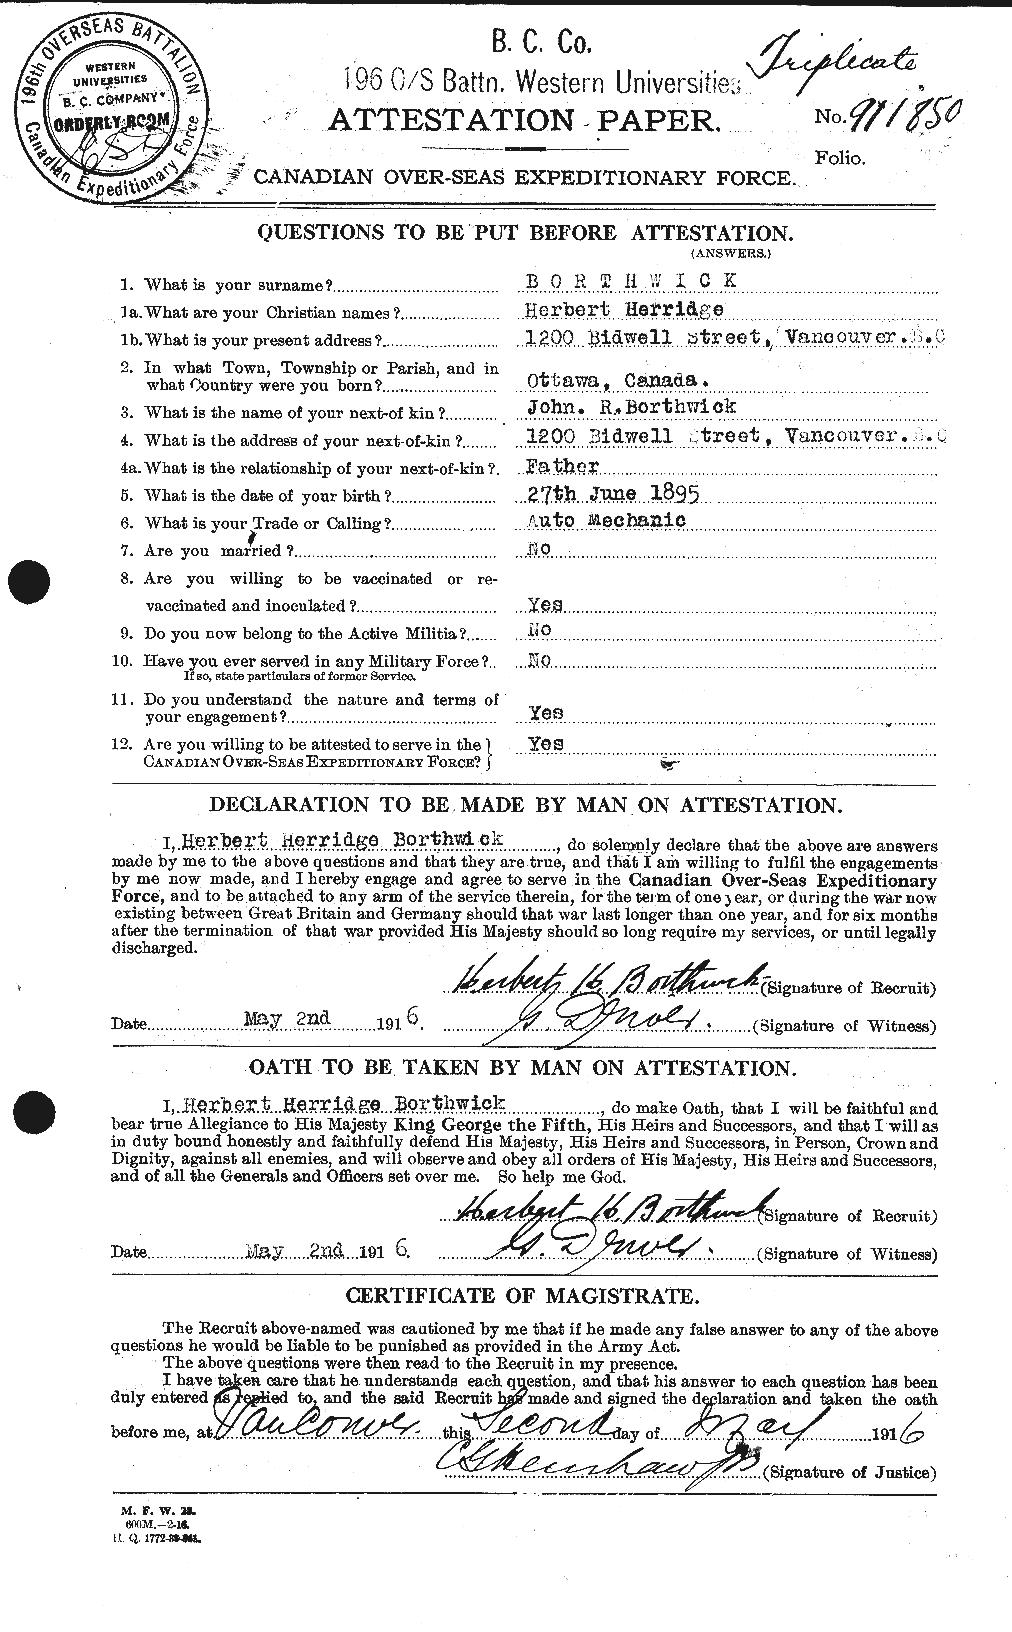 Personnel Records of the First World War - CEF 253497a